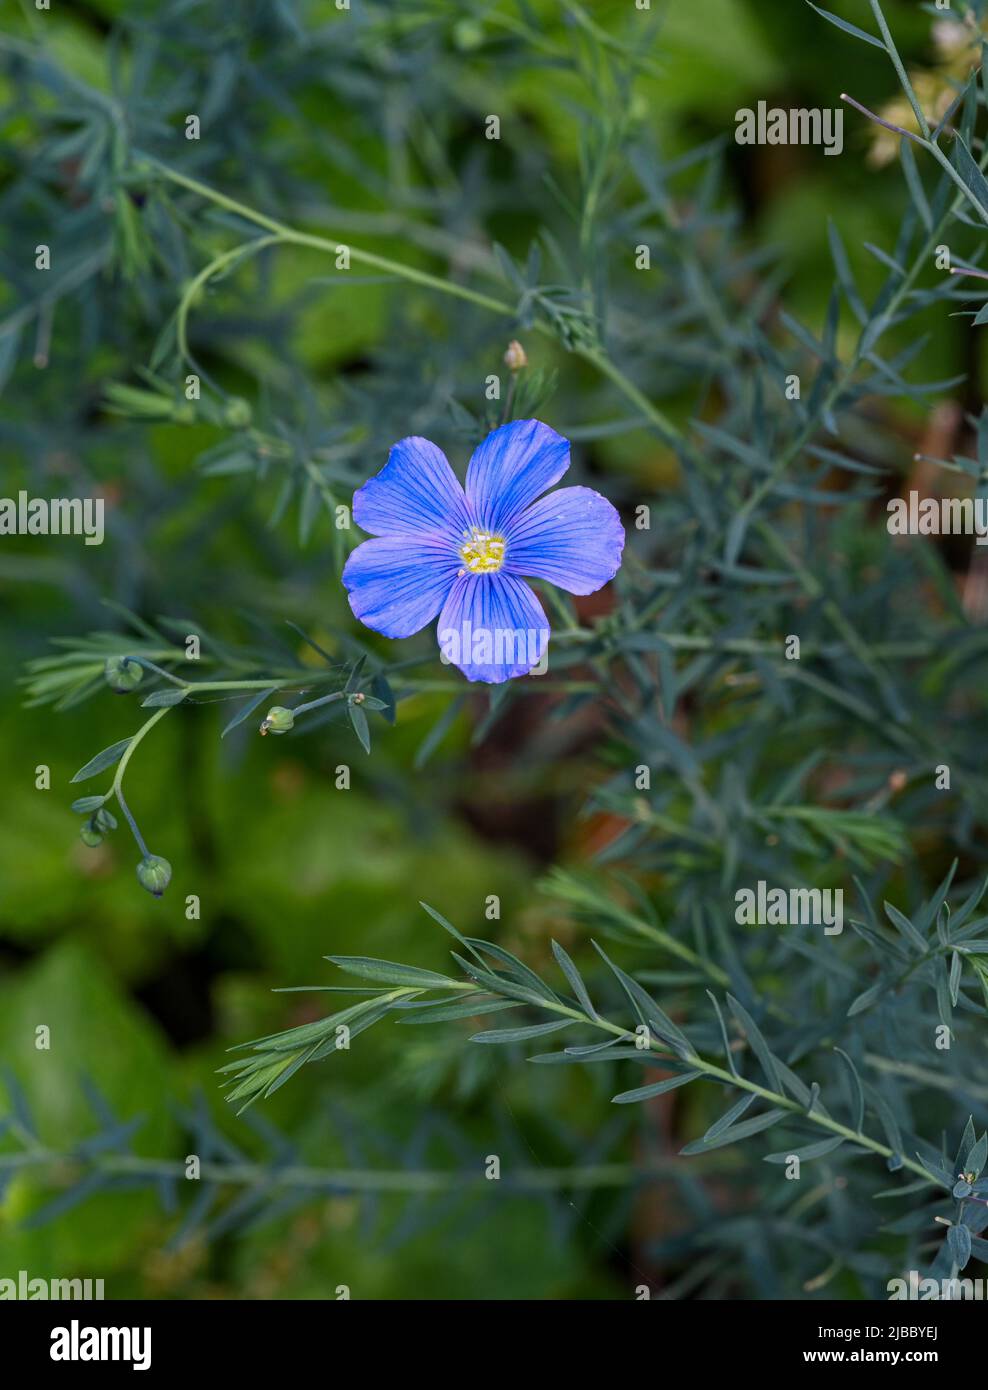 Blue flax, Lint or Perennial flax in bloom. Botanical Garden, KIT Karlsruhe, Germany, Europe Stock Photo